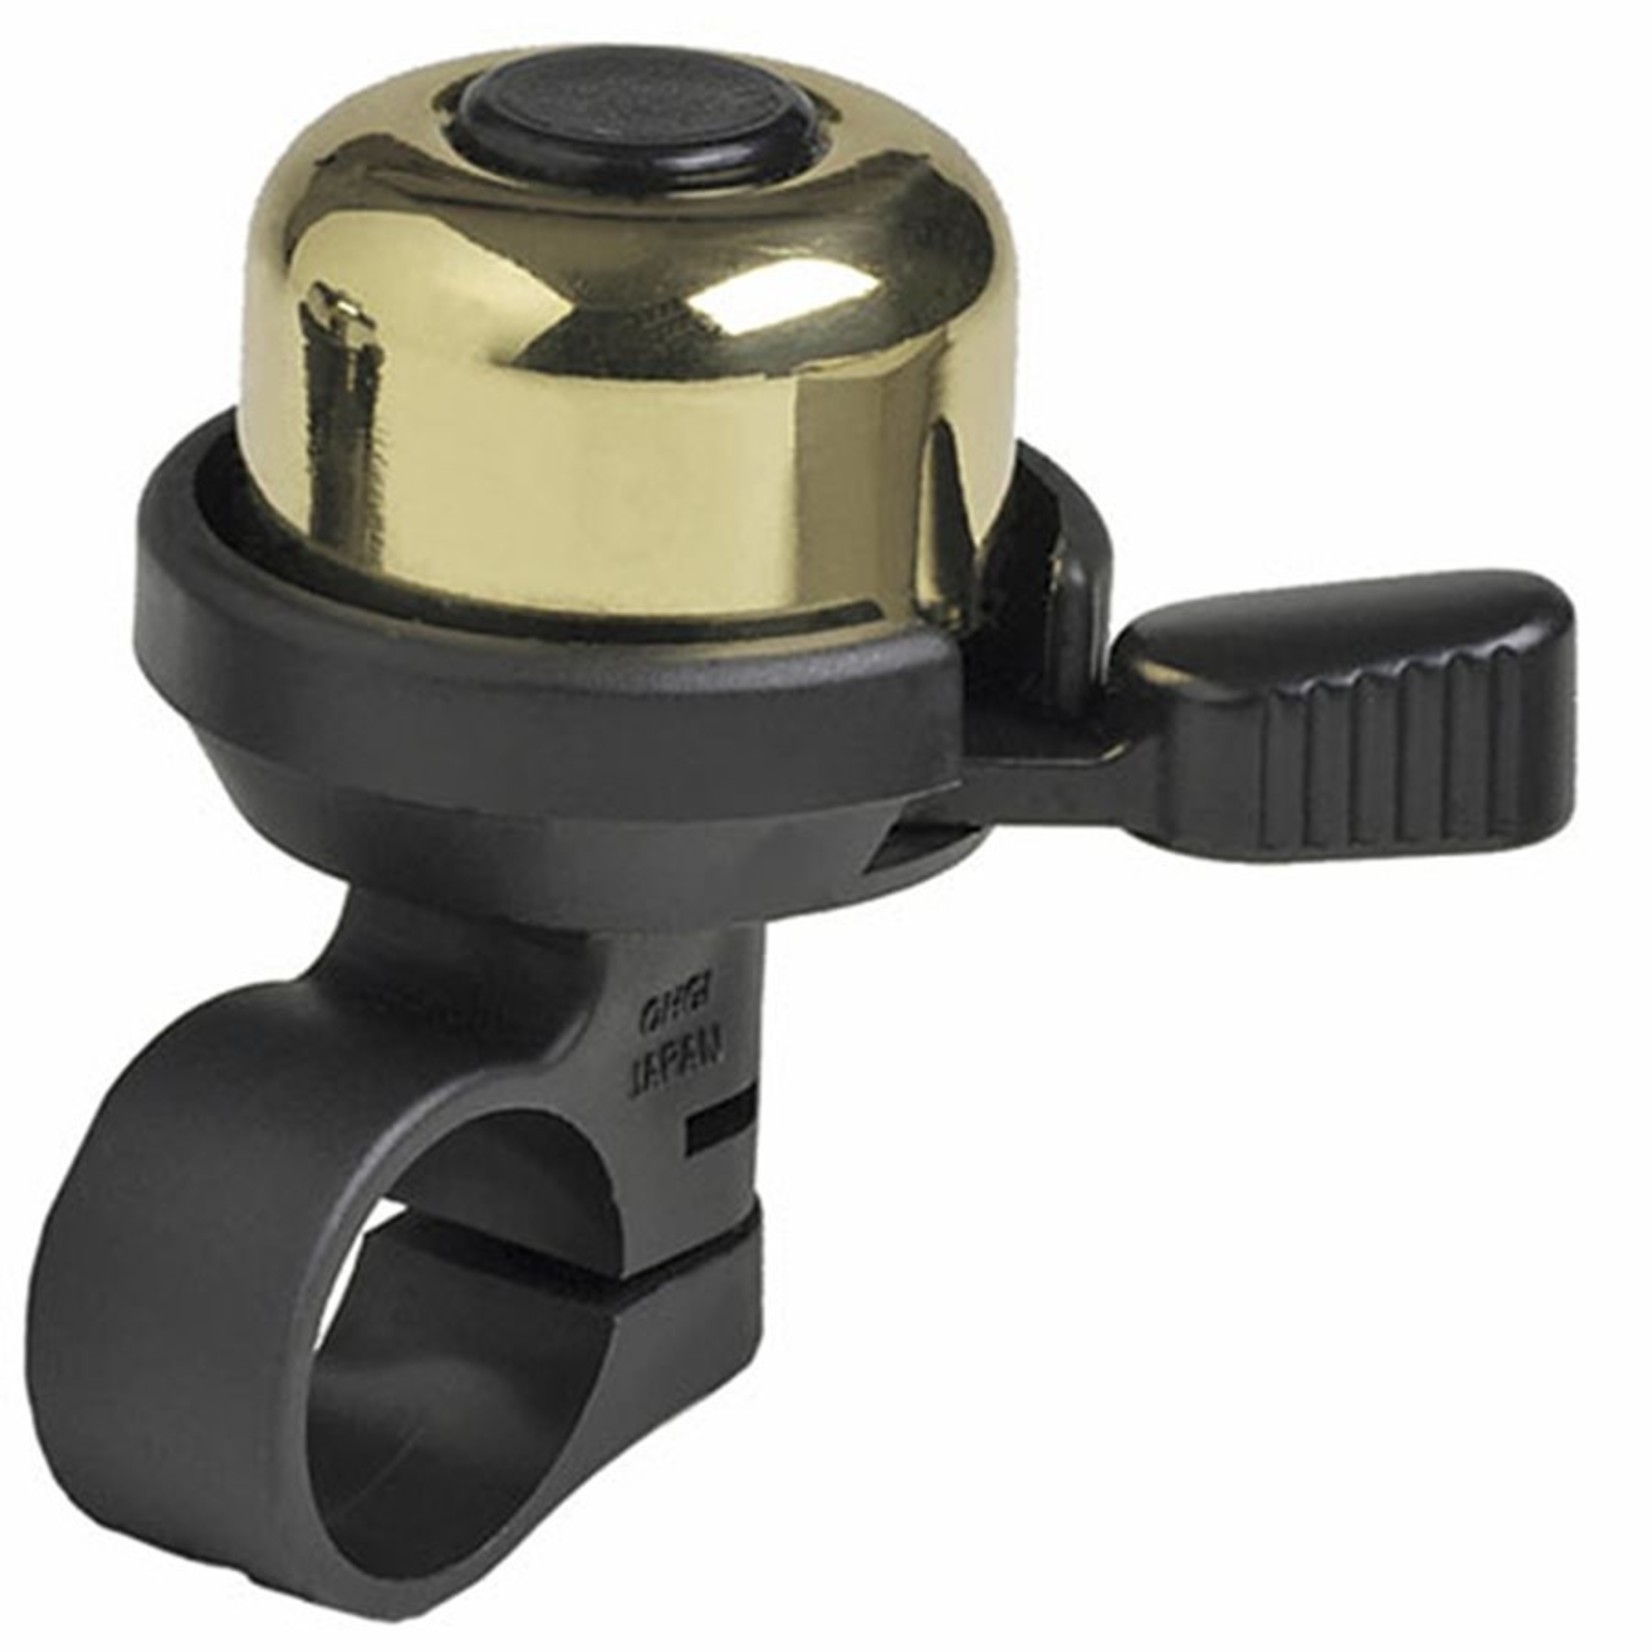 Mirrycle Incredibell Duet Brass Bell Polished Brass